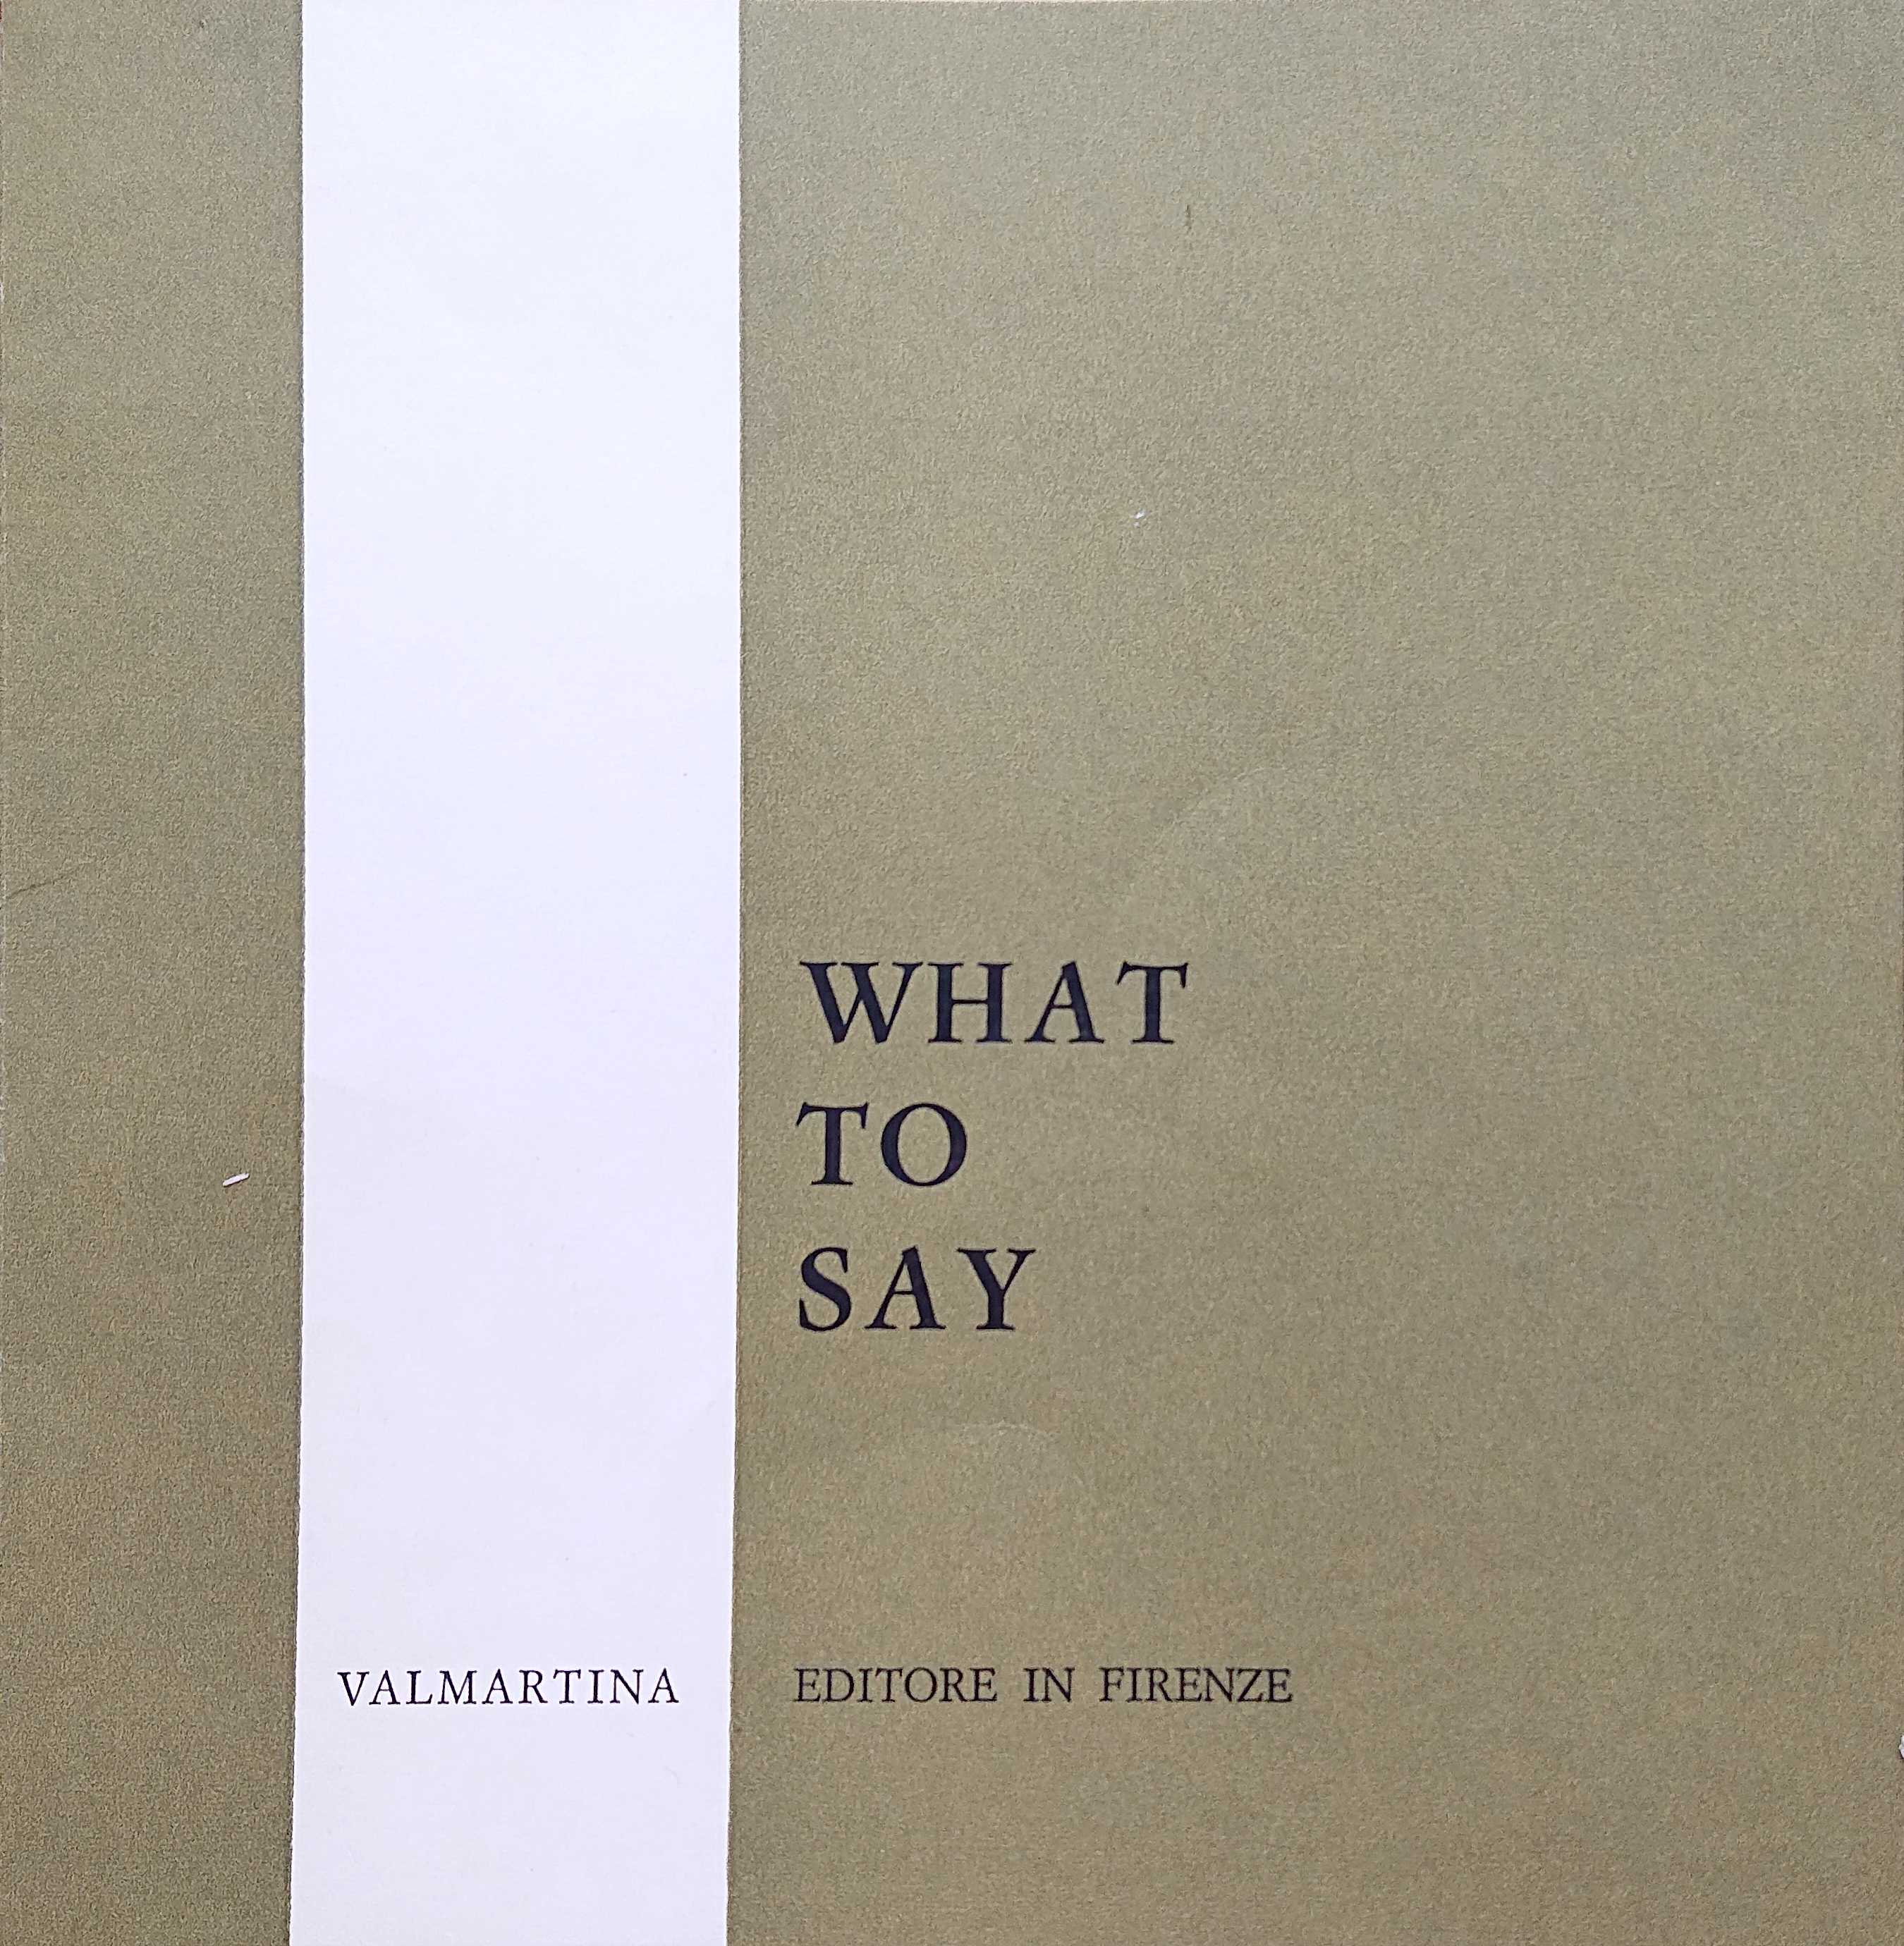 Picture of What to say (Cosa dire e come dirlo) by artist Licia Barocas from the BBC books - Records and Tapes library